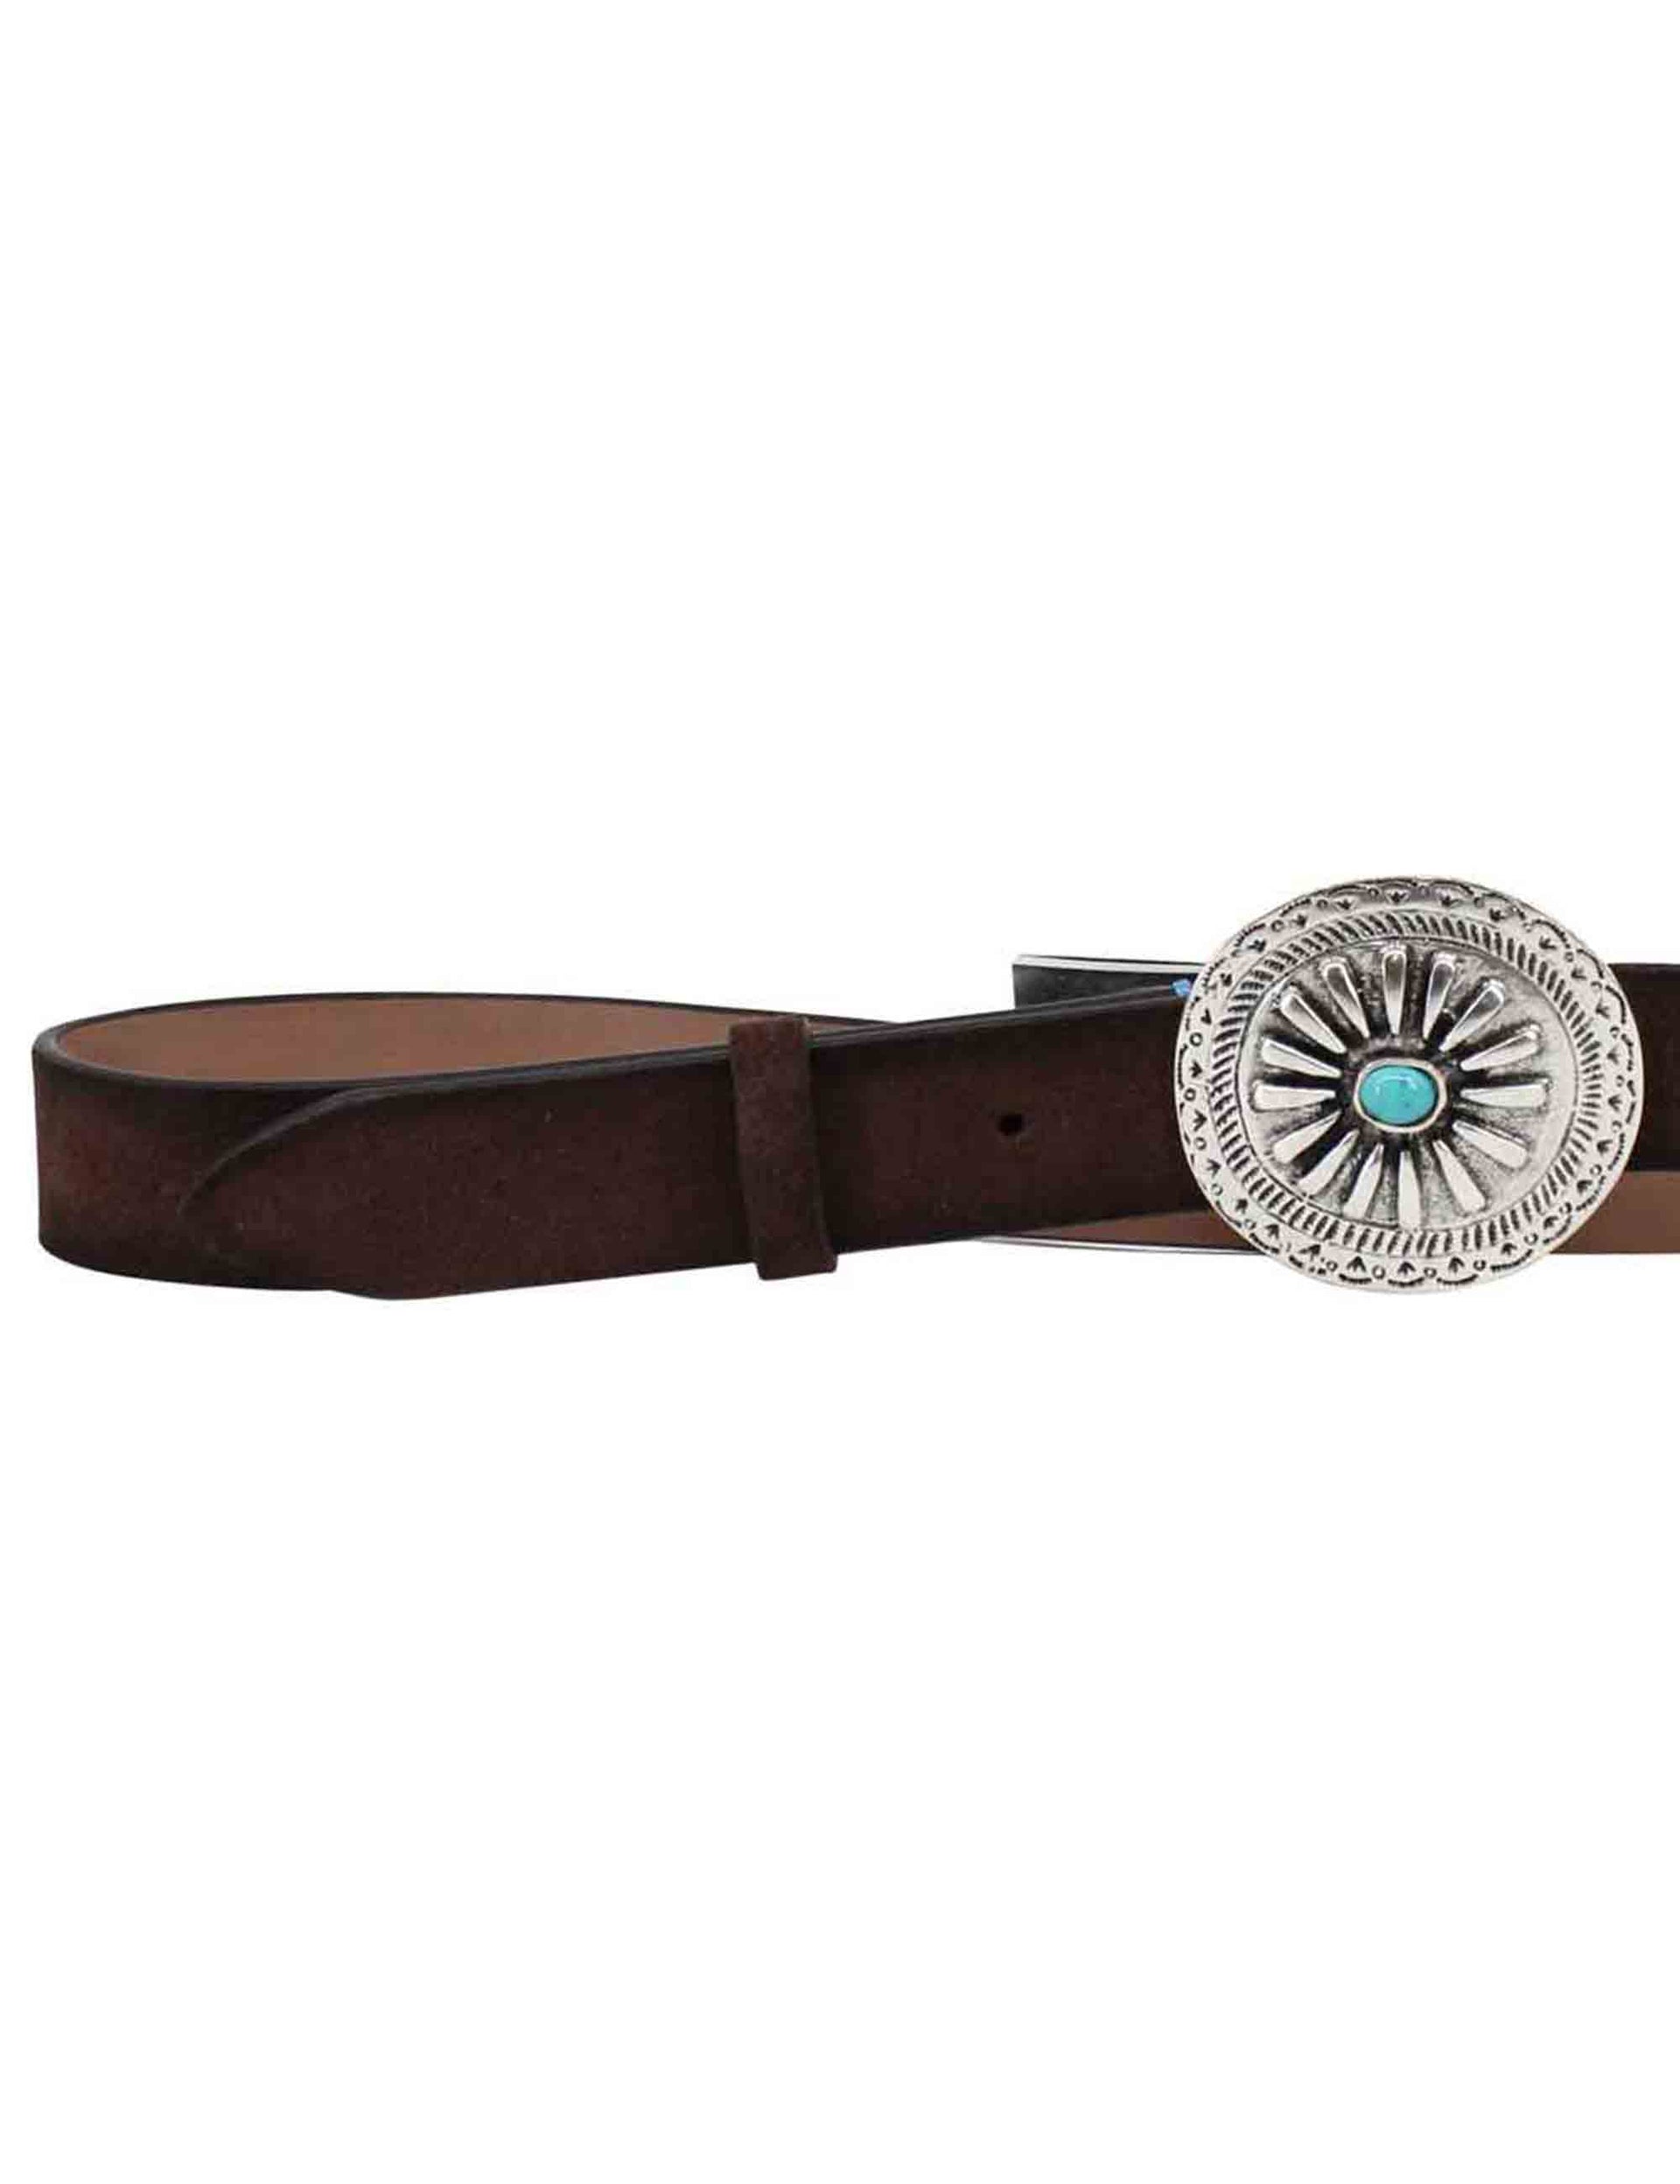 Women's belts in dark brown leather with silver and turquoise buckle